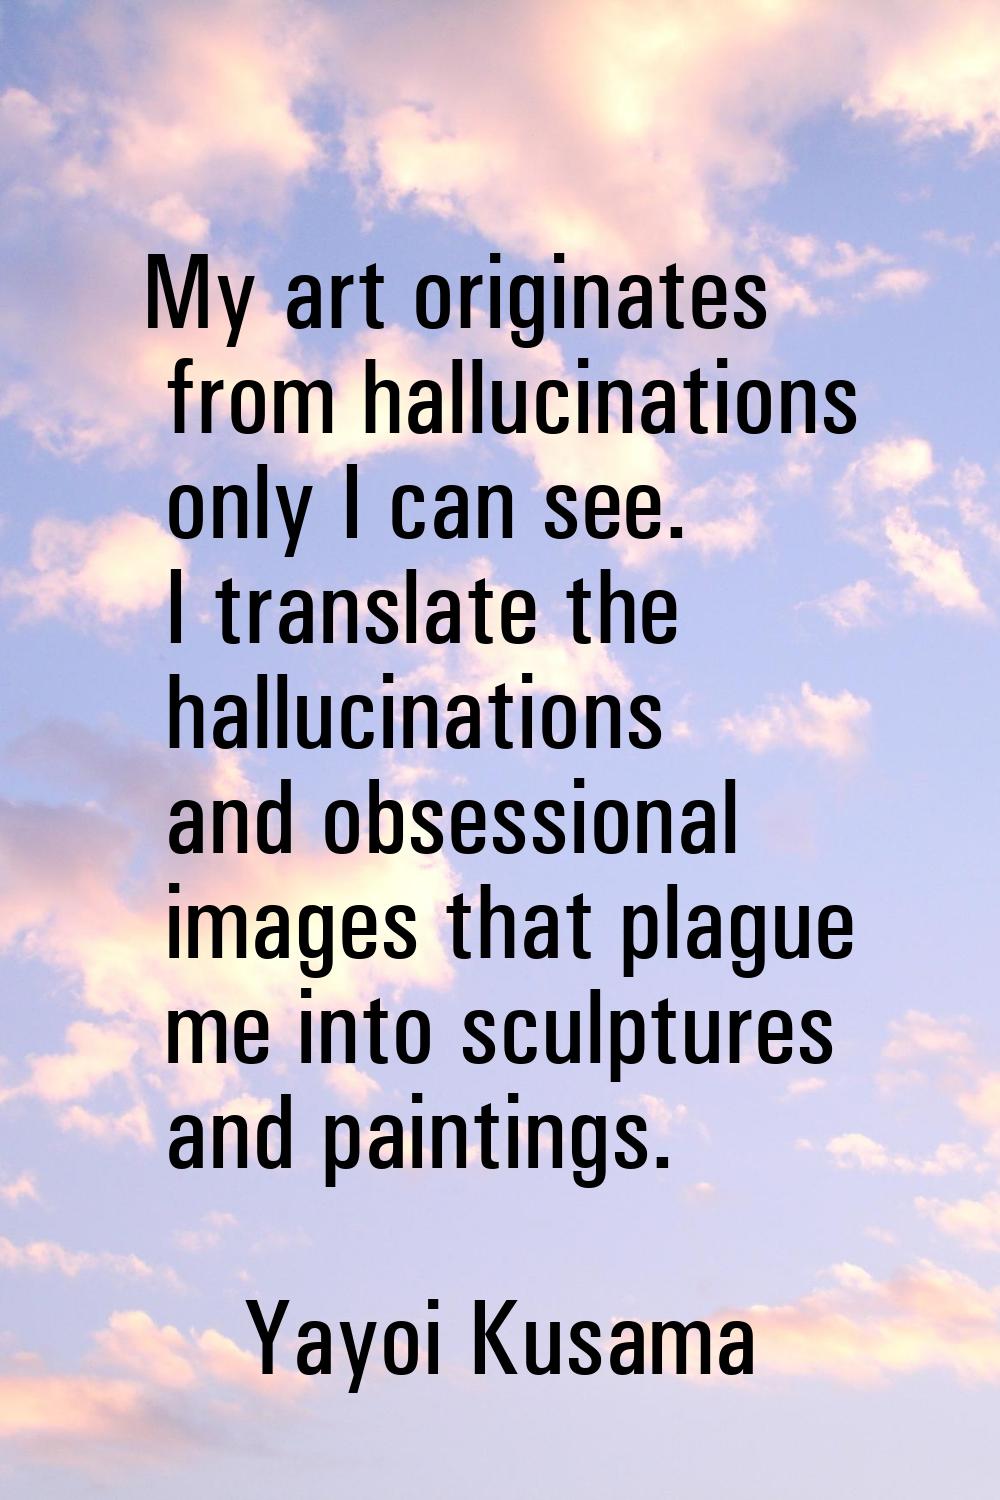 My art originates from hallucinations only I can see. I translate the hallucinations and obsessiona